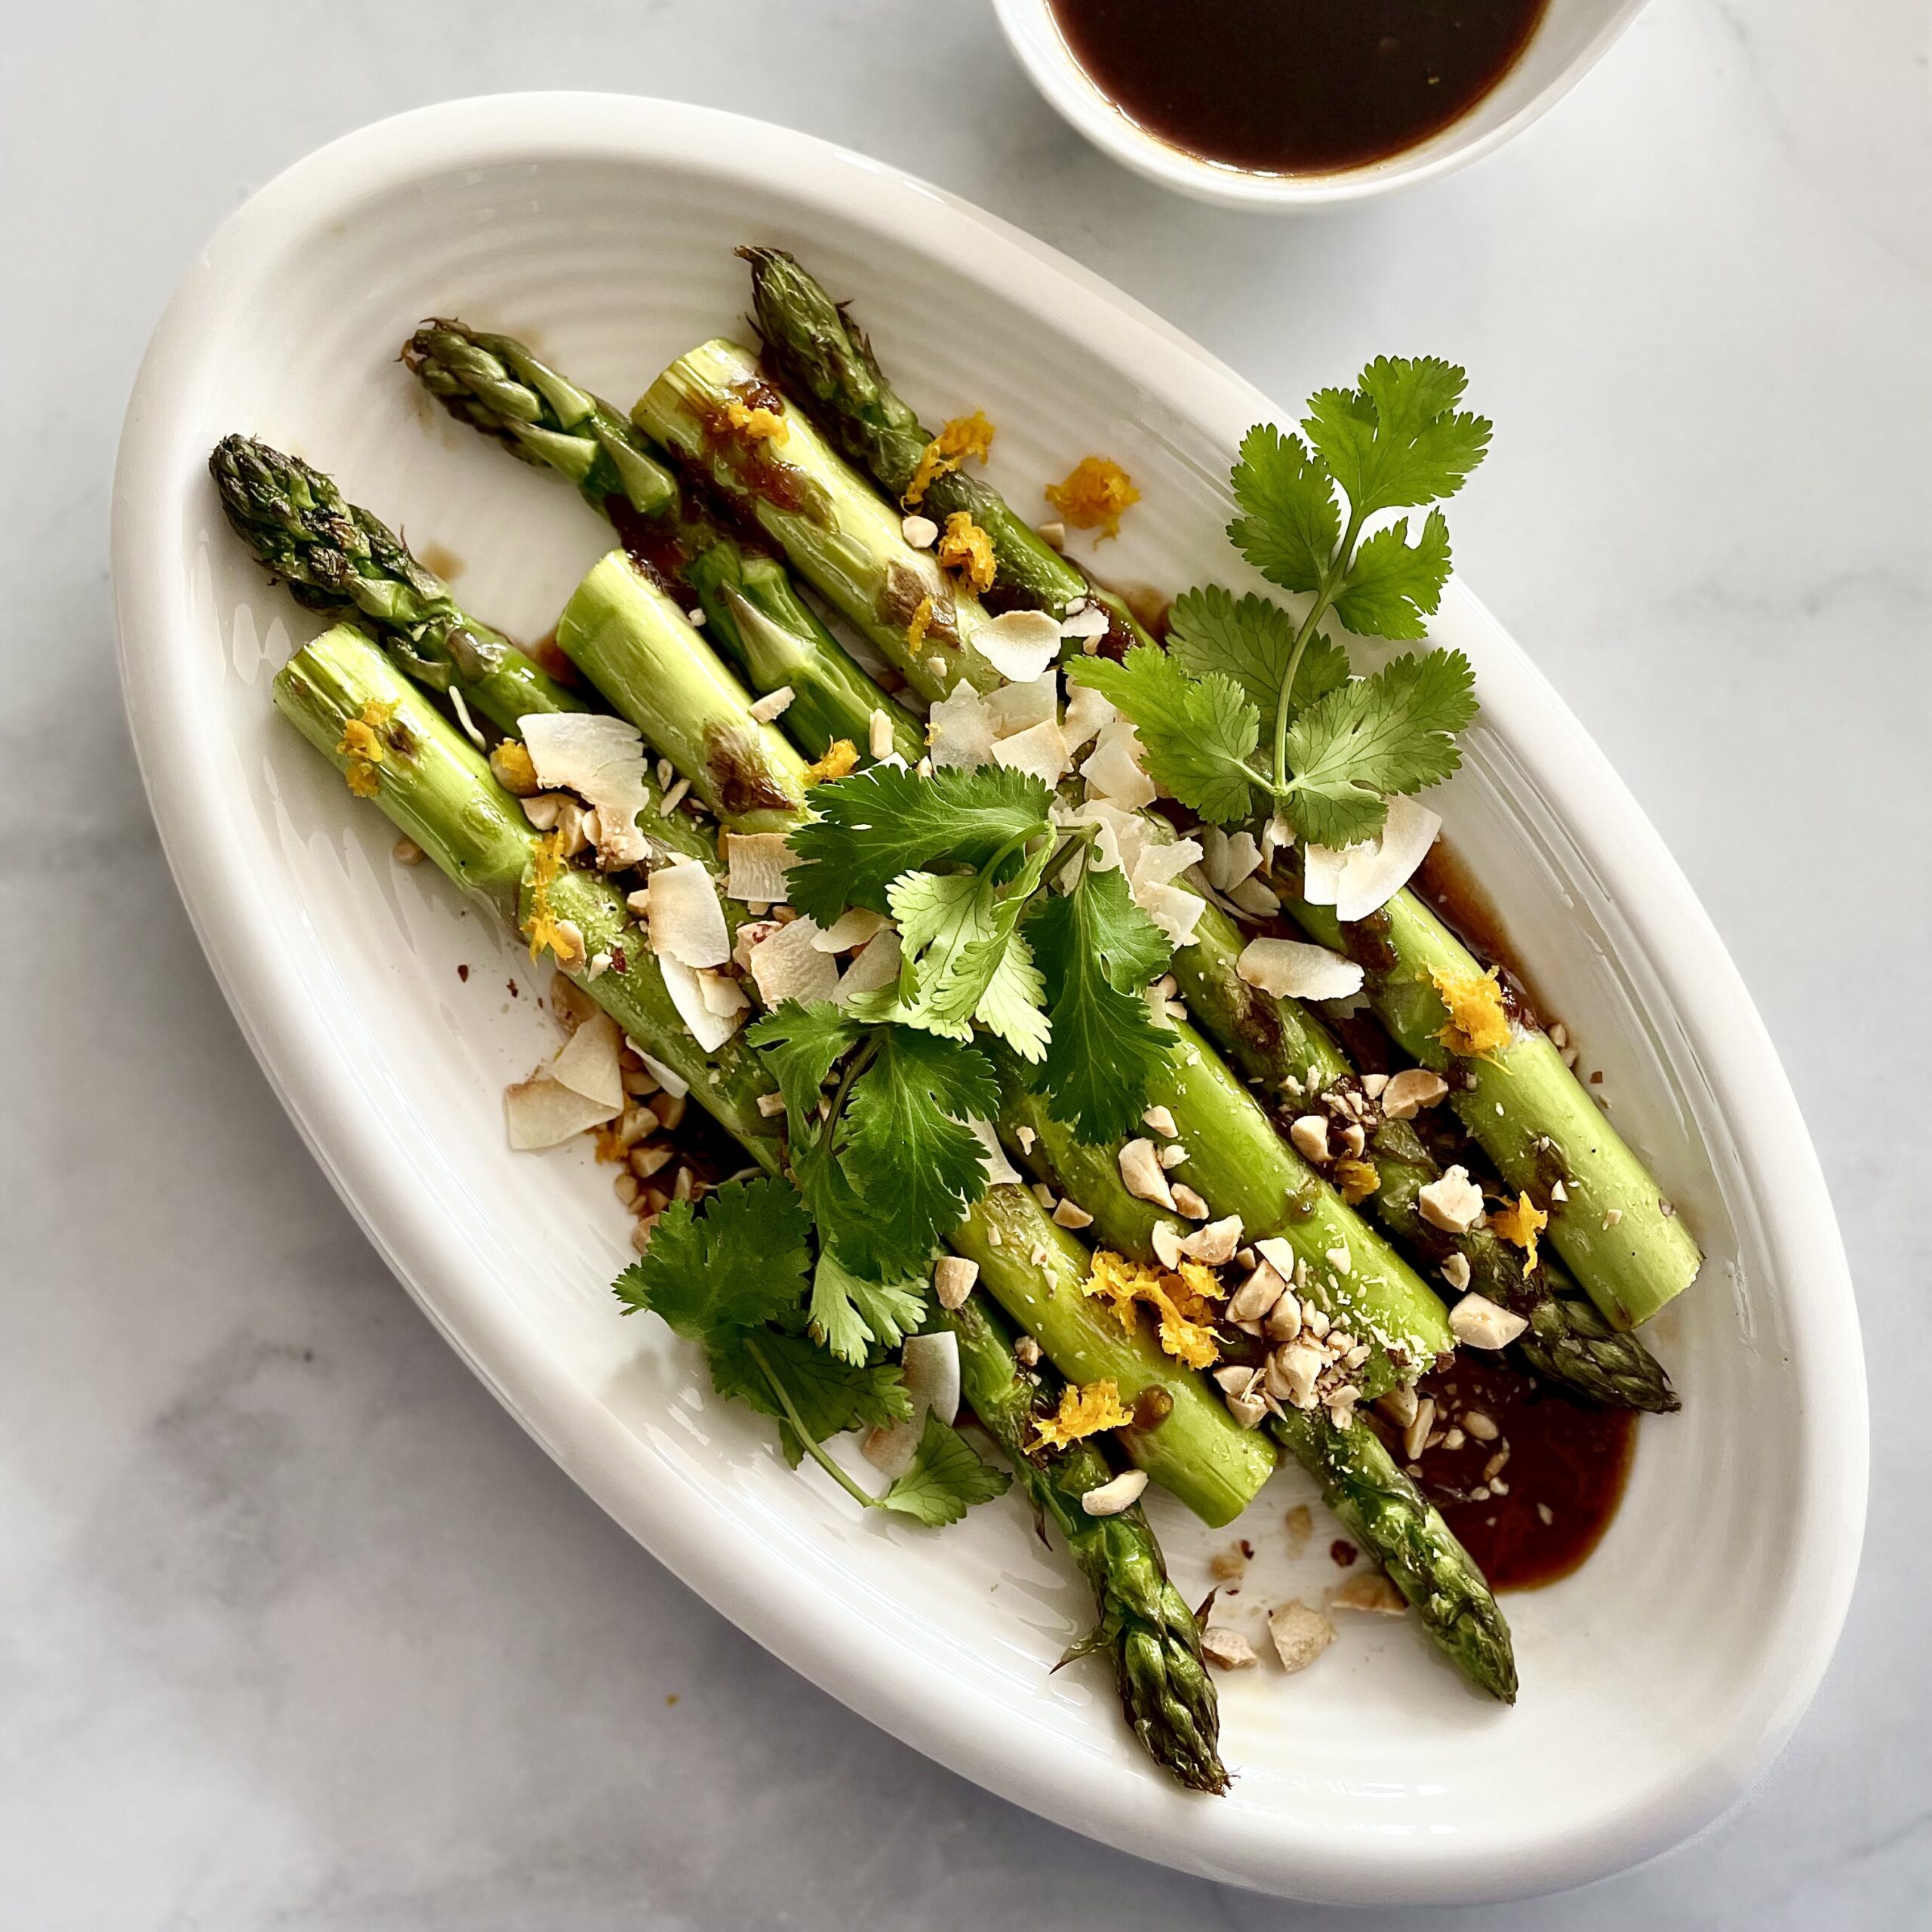 kung pao drizzle sauce over asparagus